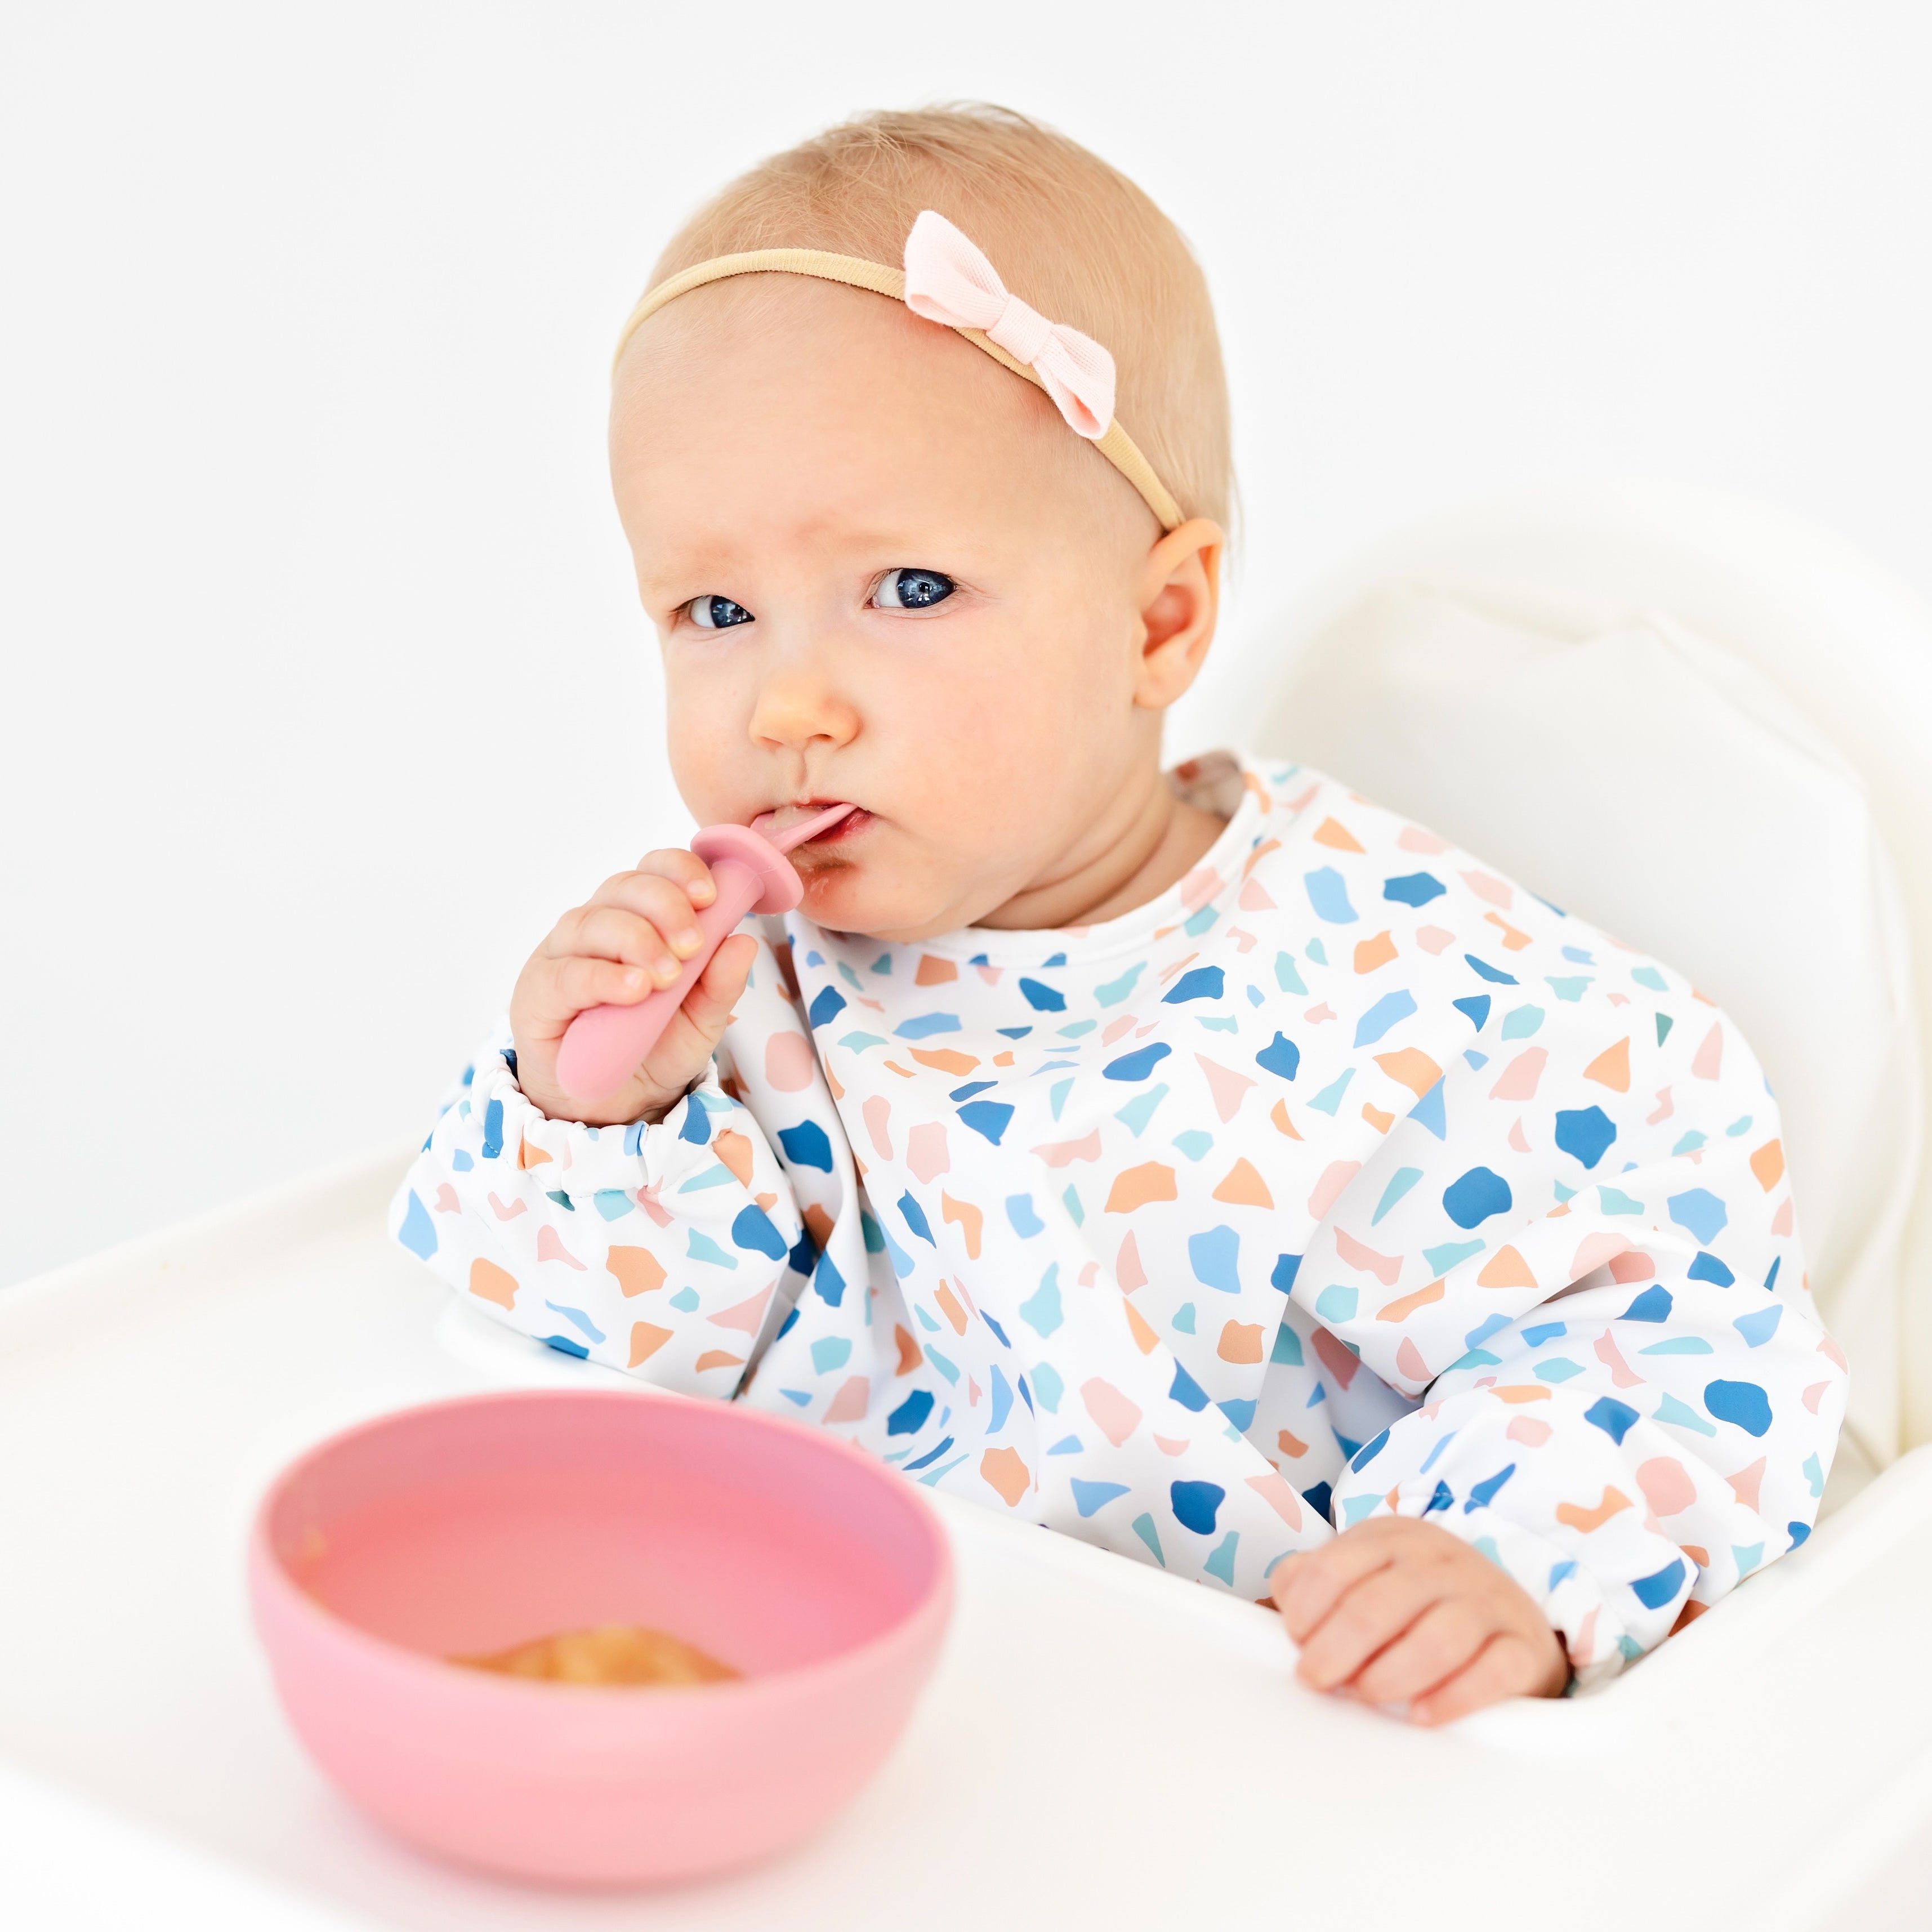 Baby eating with spoonie